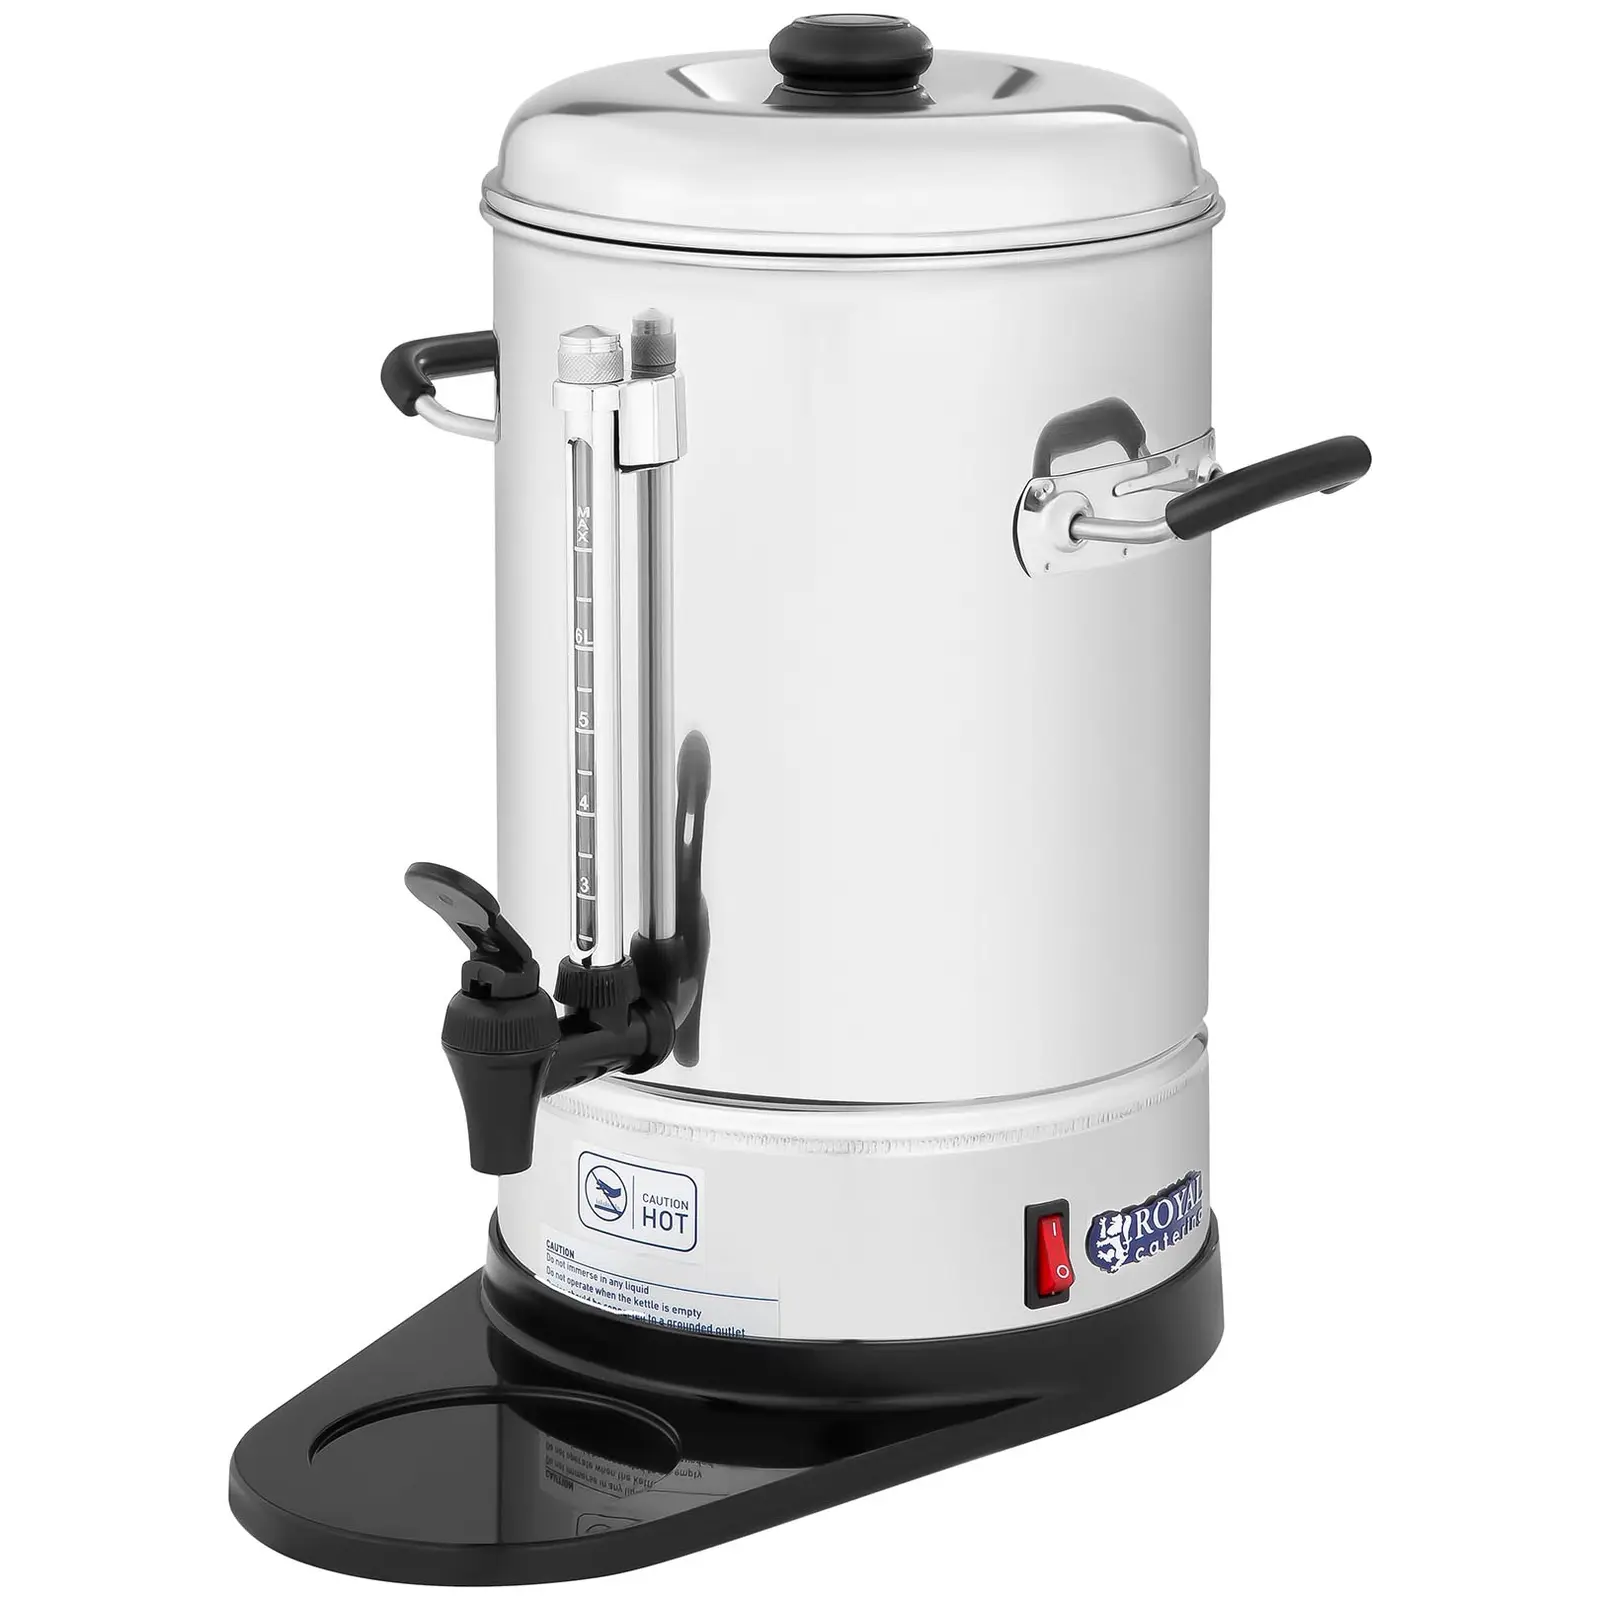 Commercial Coffee Maker - 6 L